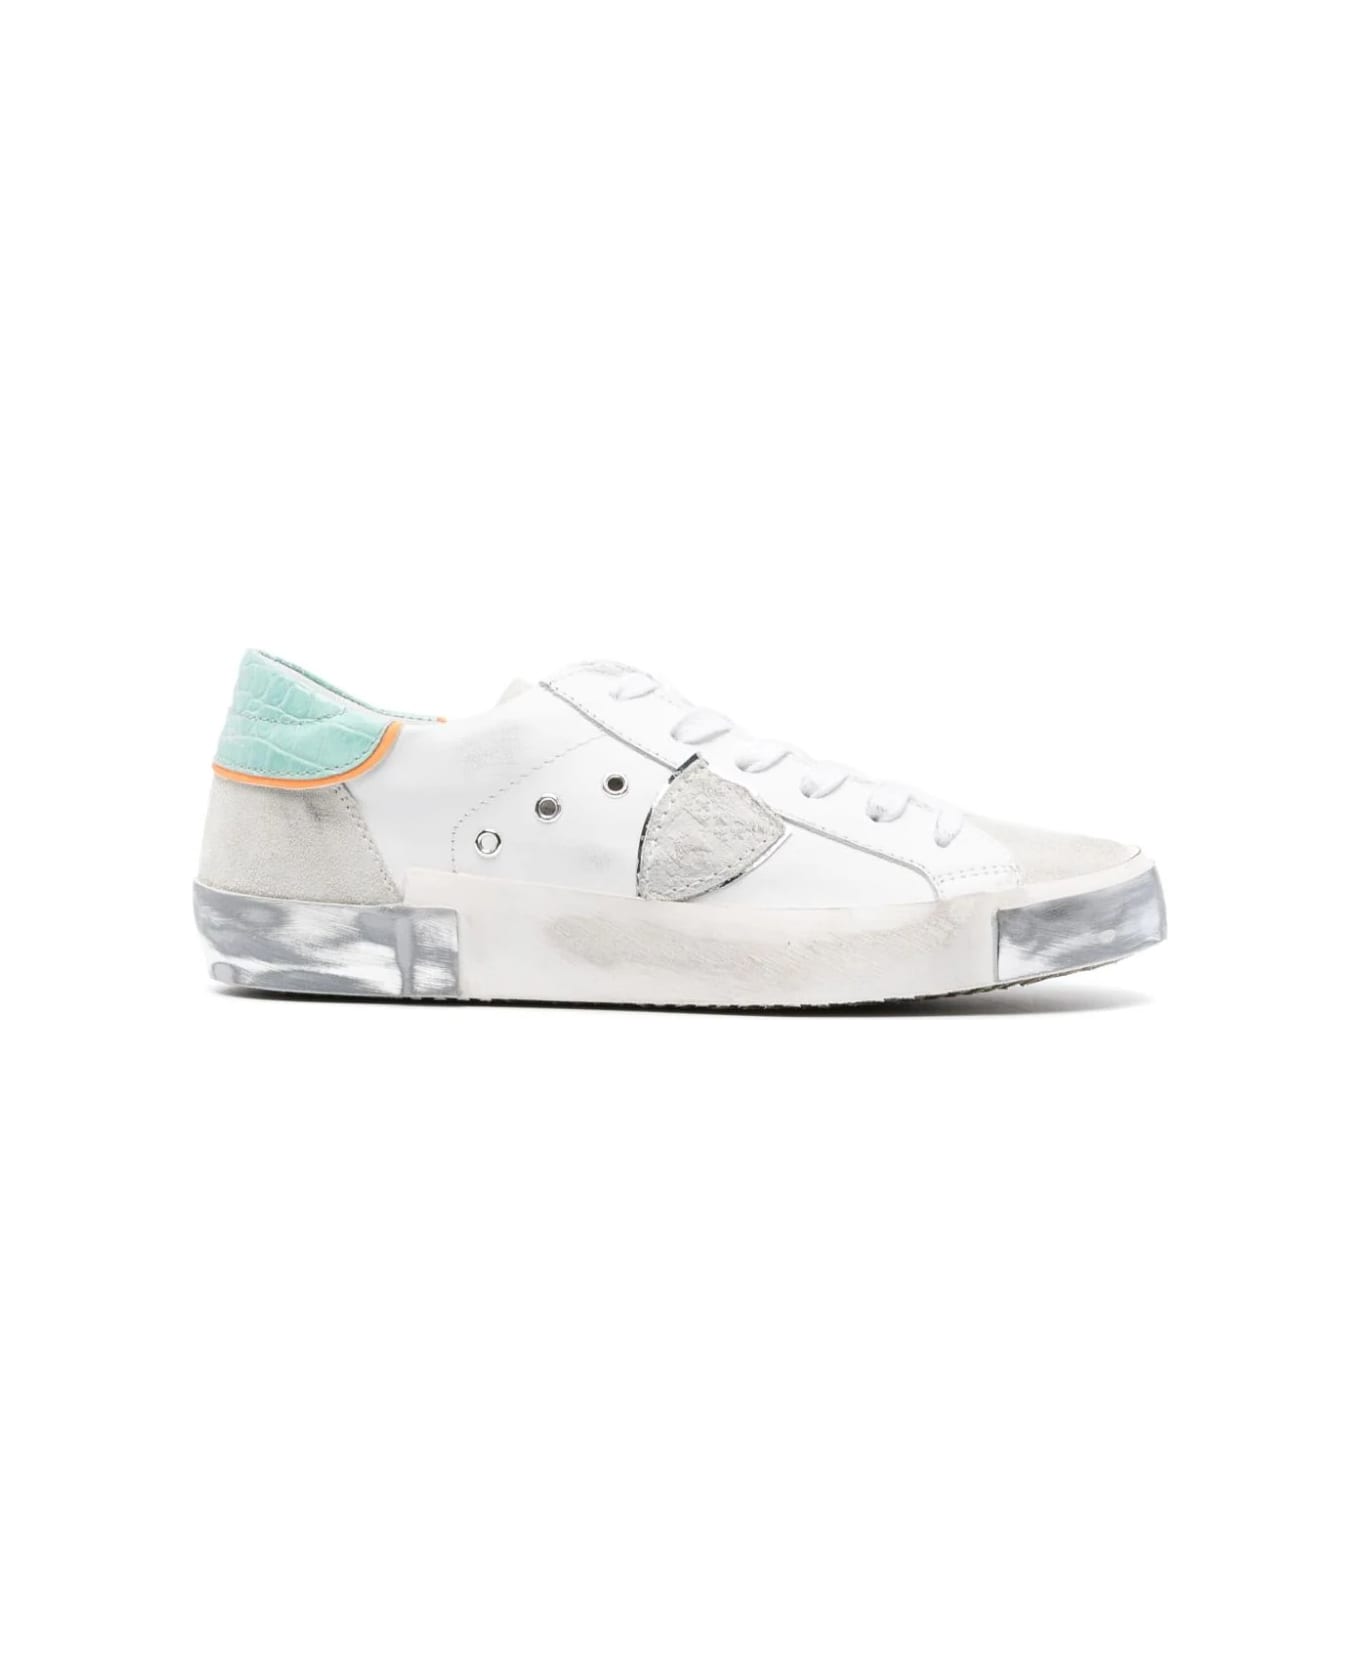 Philippe Model Prsx Low Sneakers - White And Aquamarine - White スニーカー